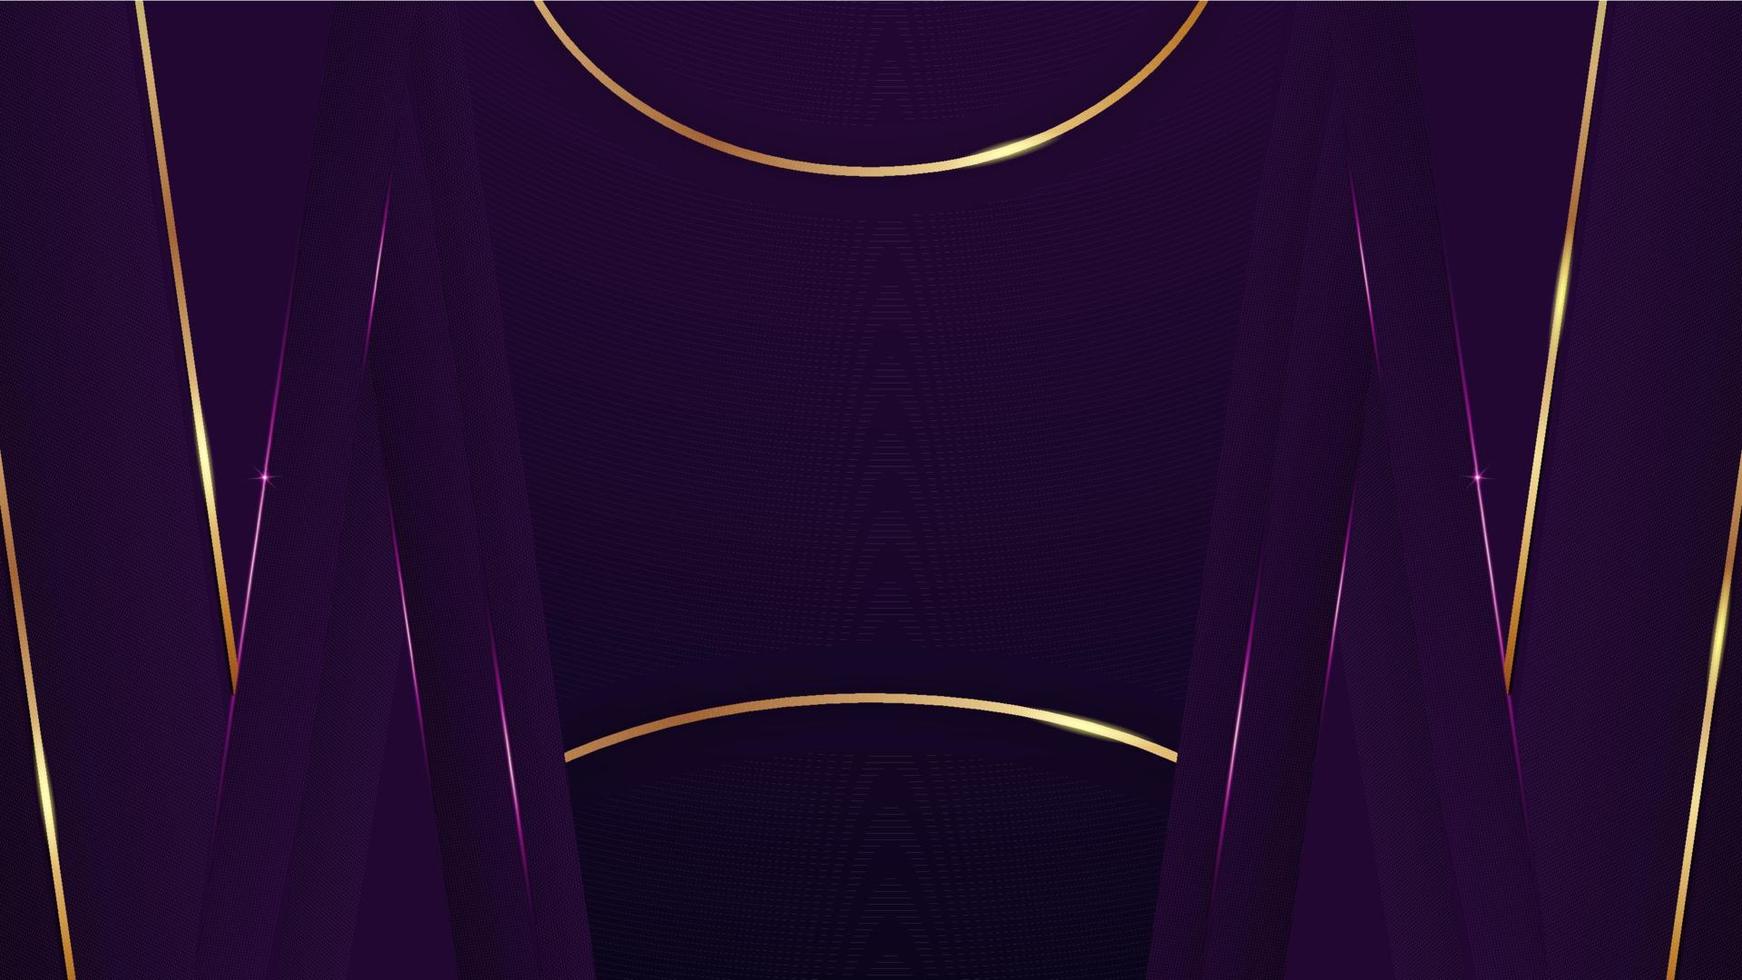 3D abstract purple luxury background. Modern design. Vector illustration template for business, cover, screen, presentation and invitation.